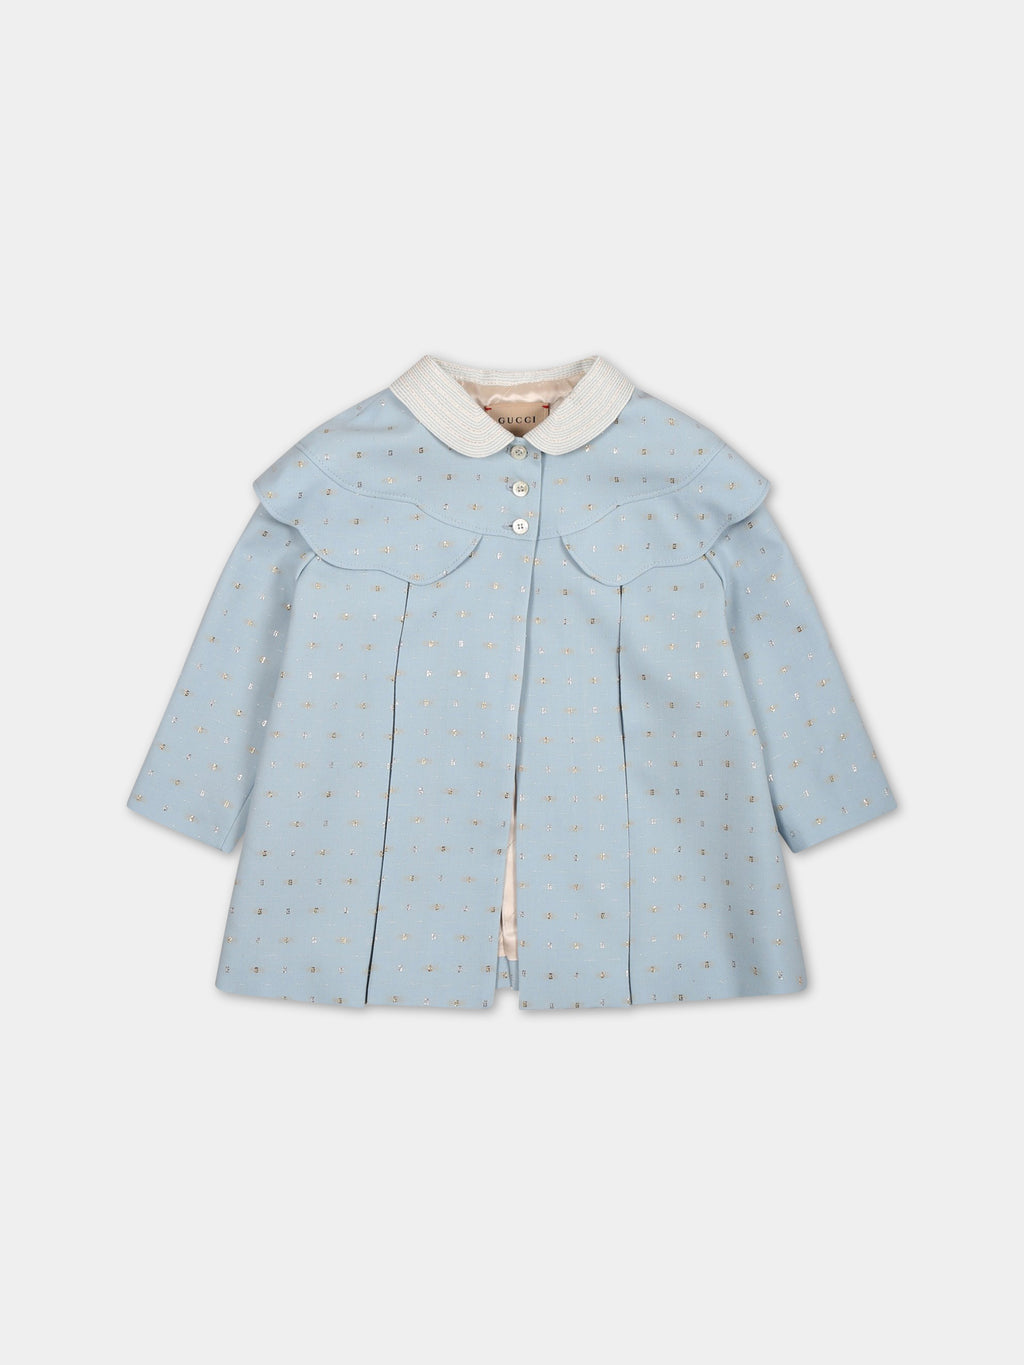 Light blue coat for baby girl with G pattern